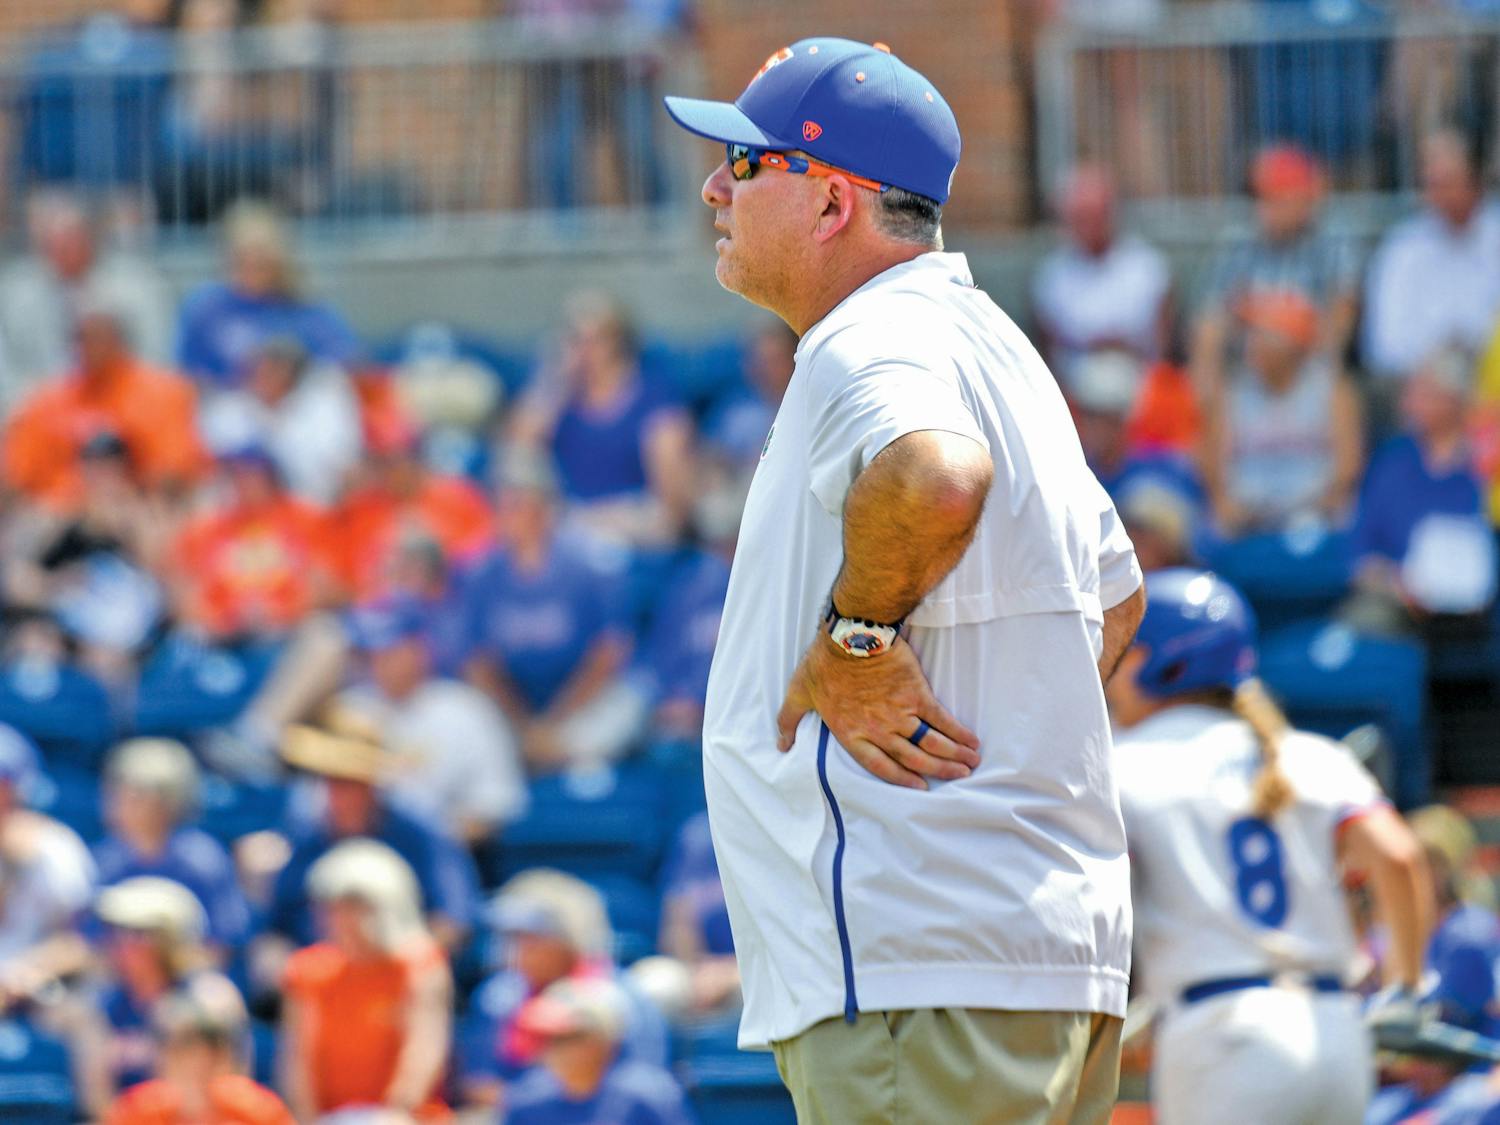 Florida coach Tim Walton was ejected on Saturday after arguing a force play at third base.